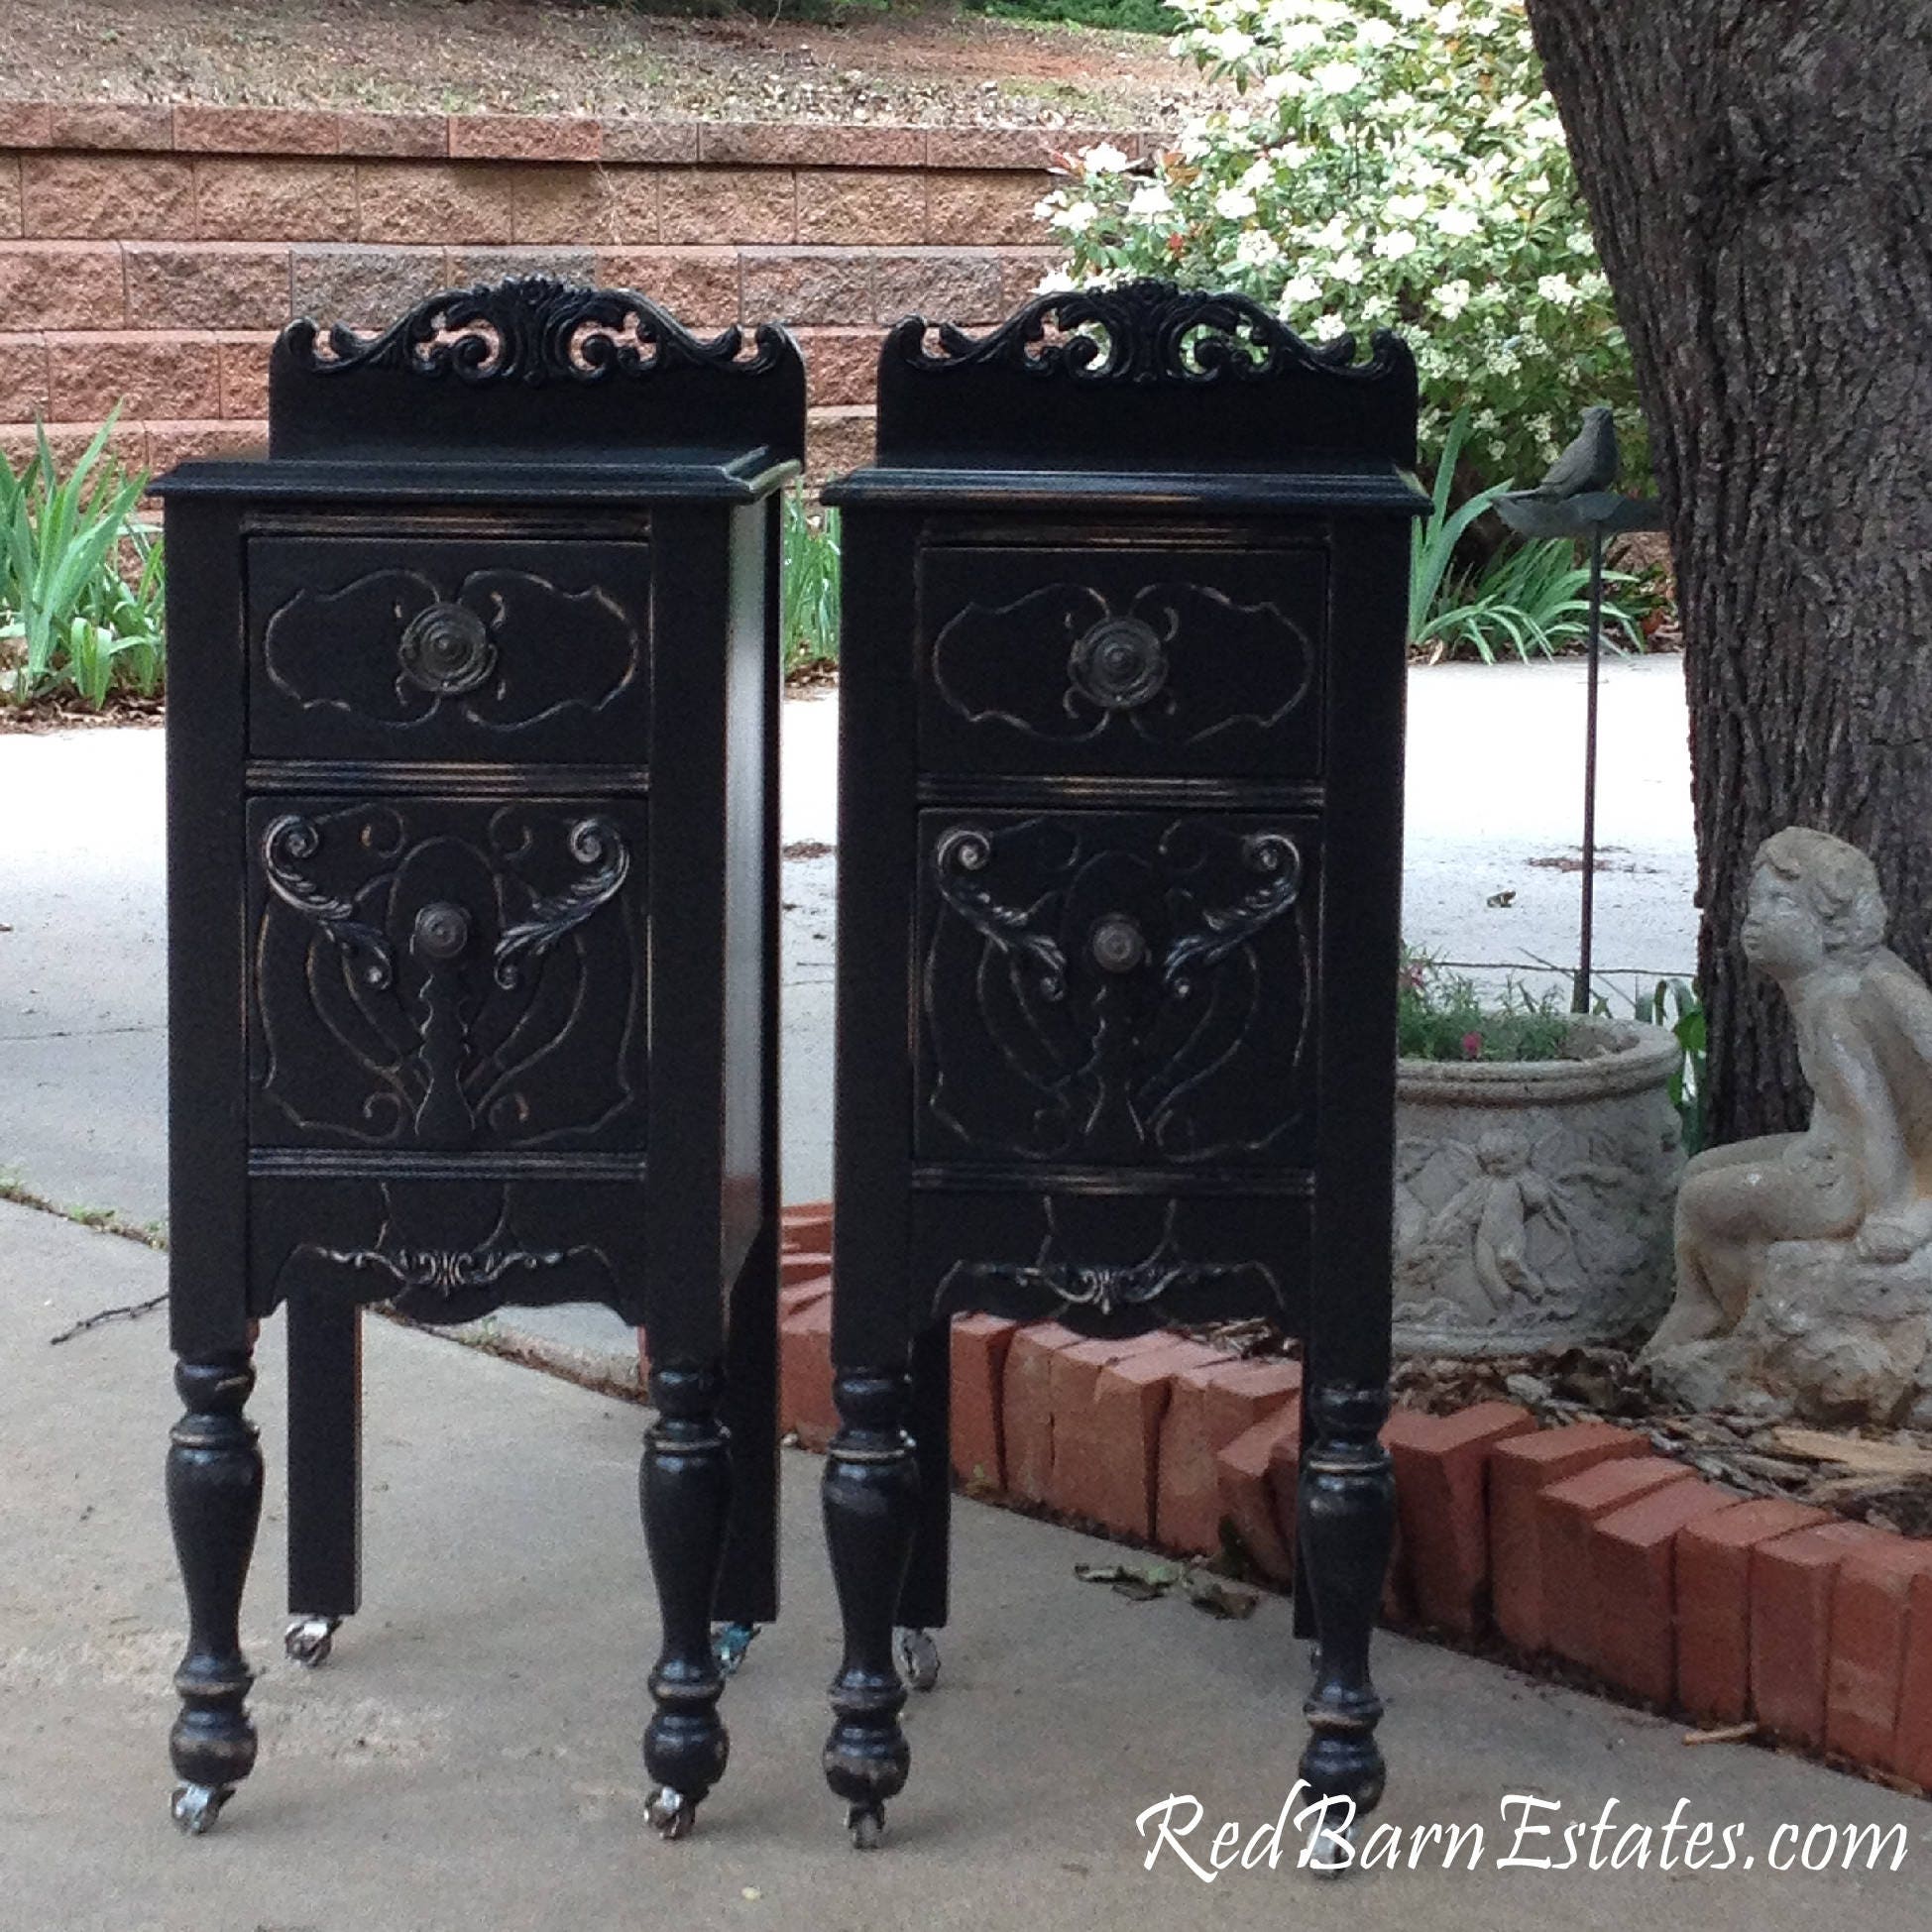 ANTIQUE NIGHTSTANDS - Painted Any Color - Re-purposed Wood Antique Furniture  - Bedside Tables - End Tables